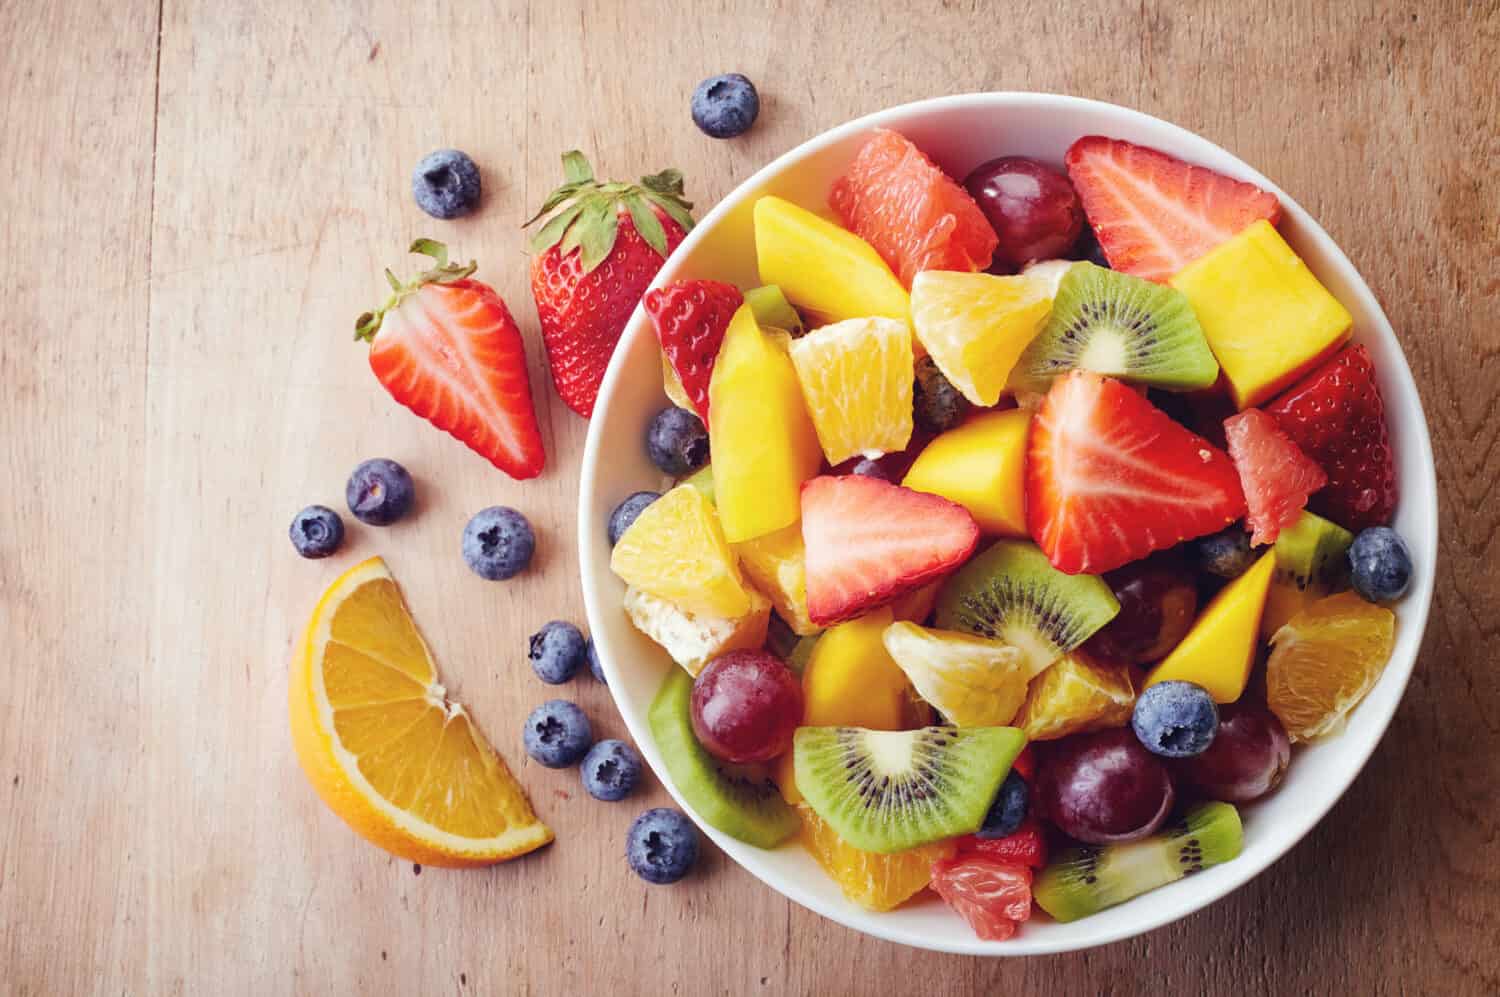 Bowl of healthy fresh fruit salad on wooden background. Top view.